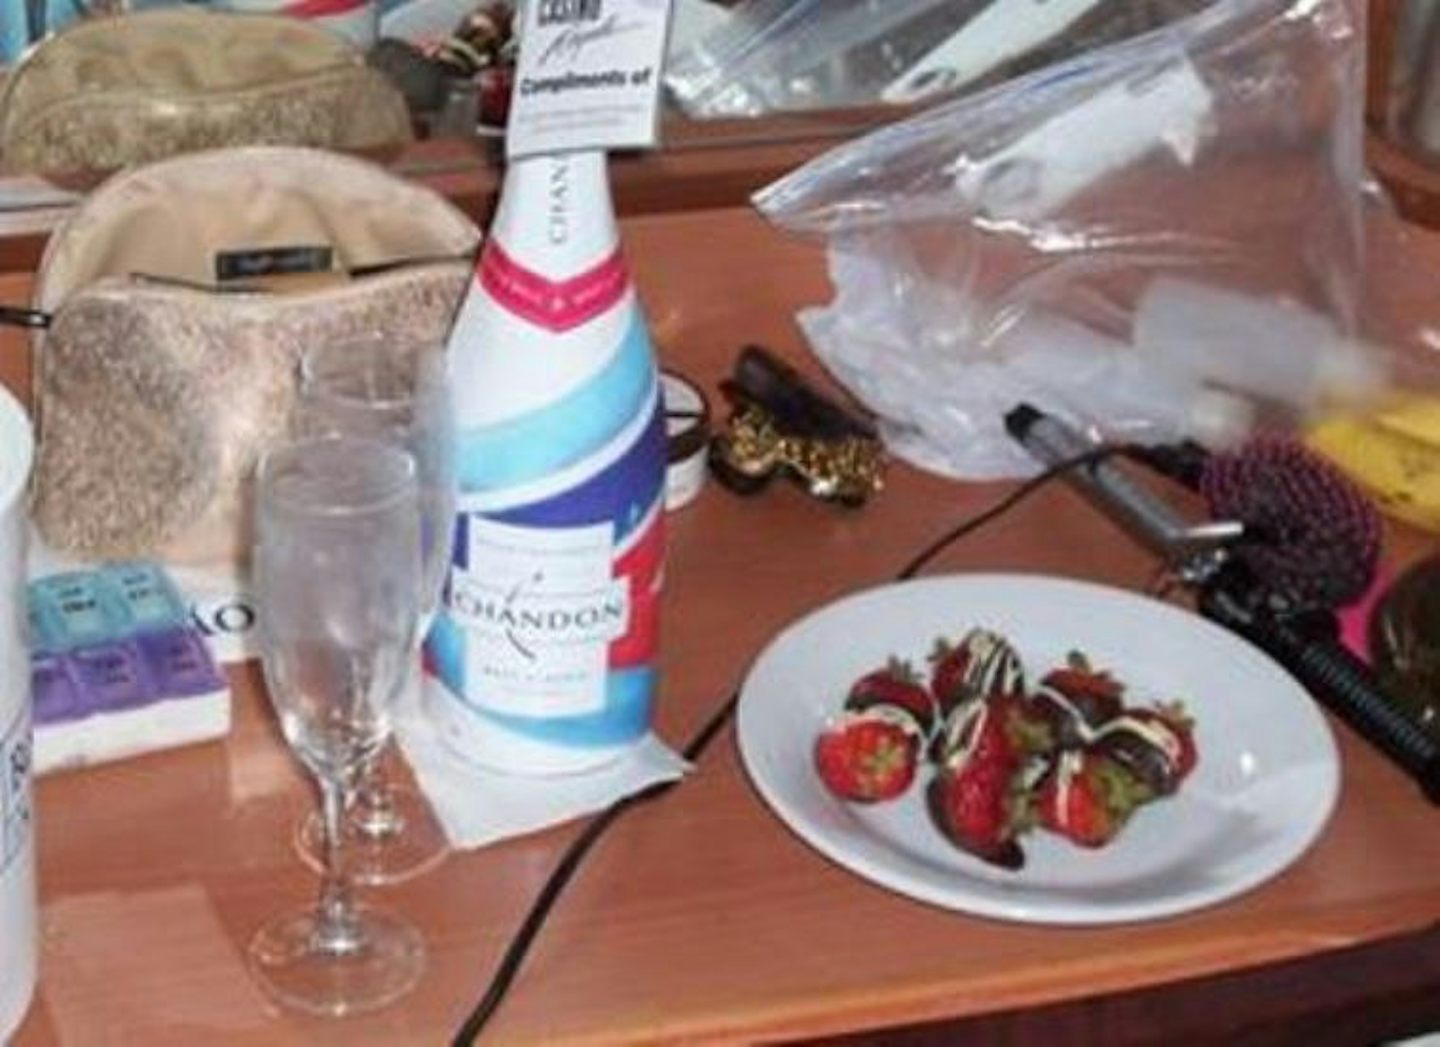 Champagne and strawberries courtesy of Casino Royale